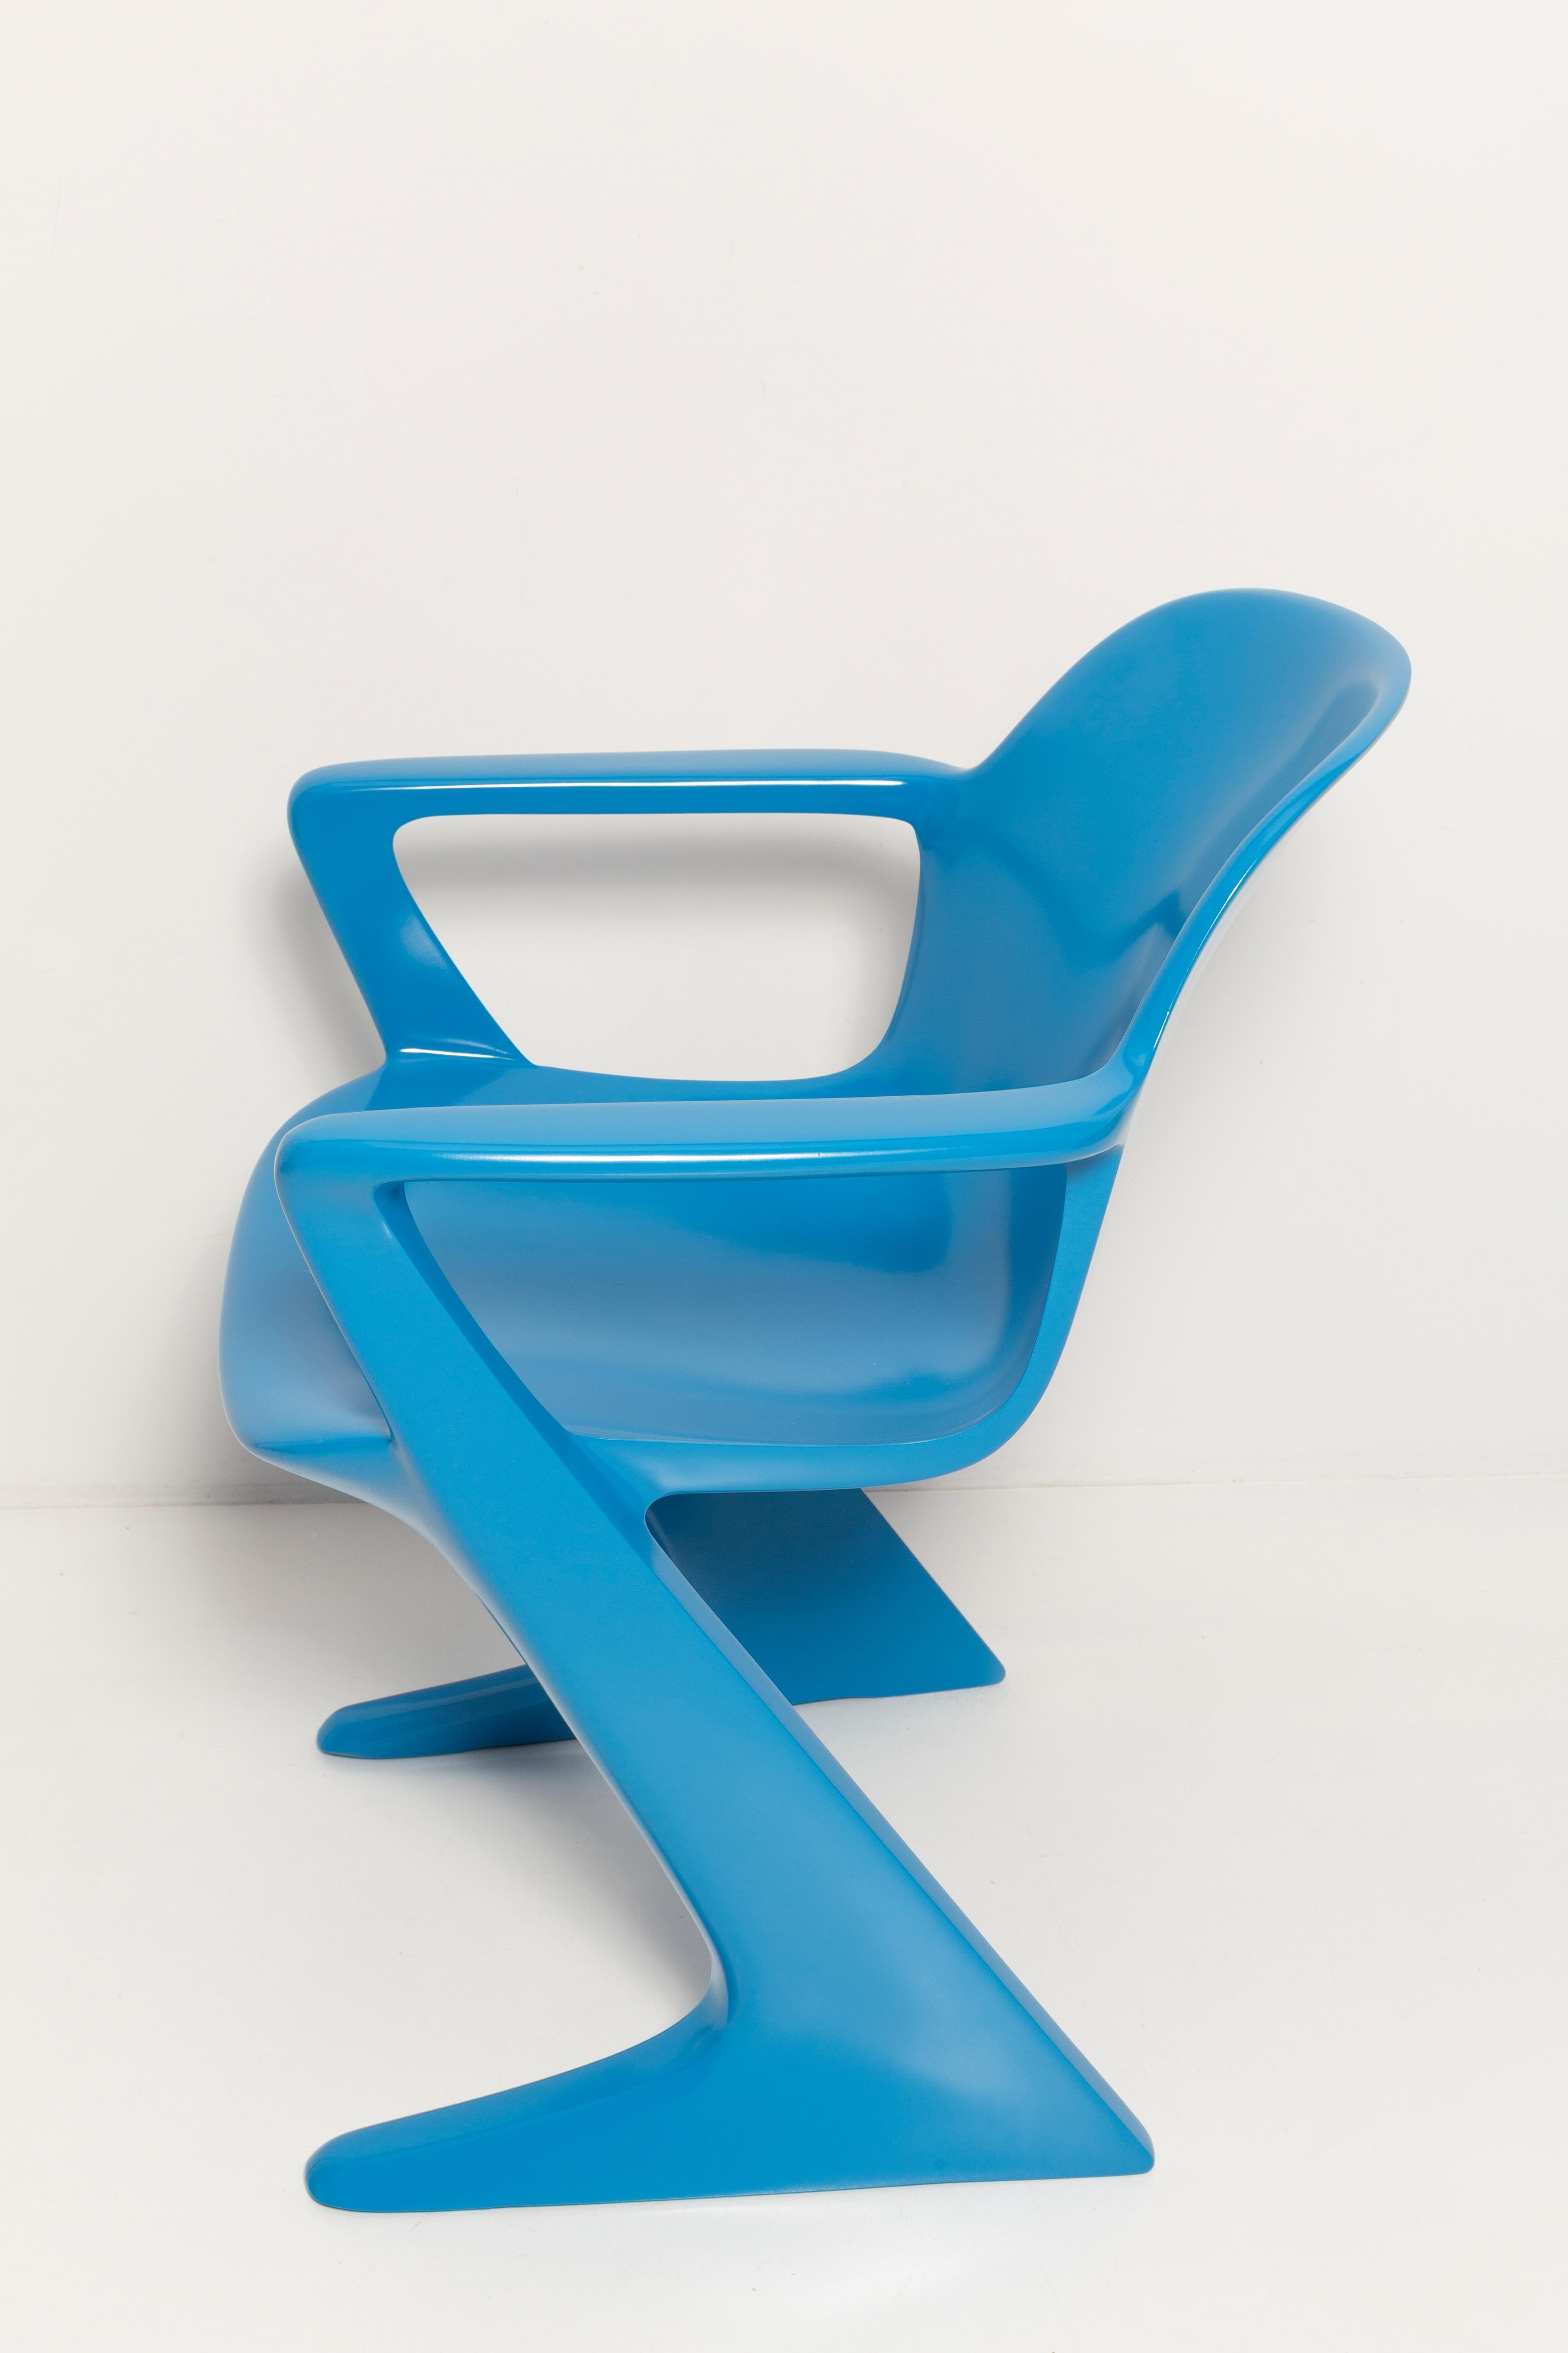 Fiberglass Set of Four Blue Kangaroo Chairs Designed by Ernst Moeckl, Germany, 1960s For Sale